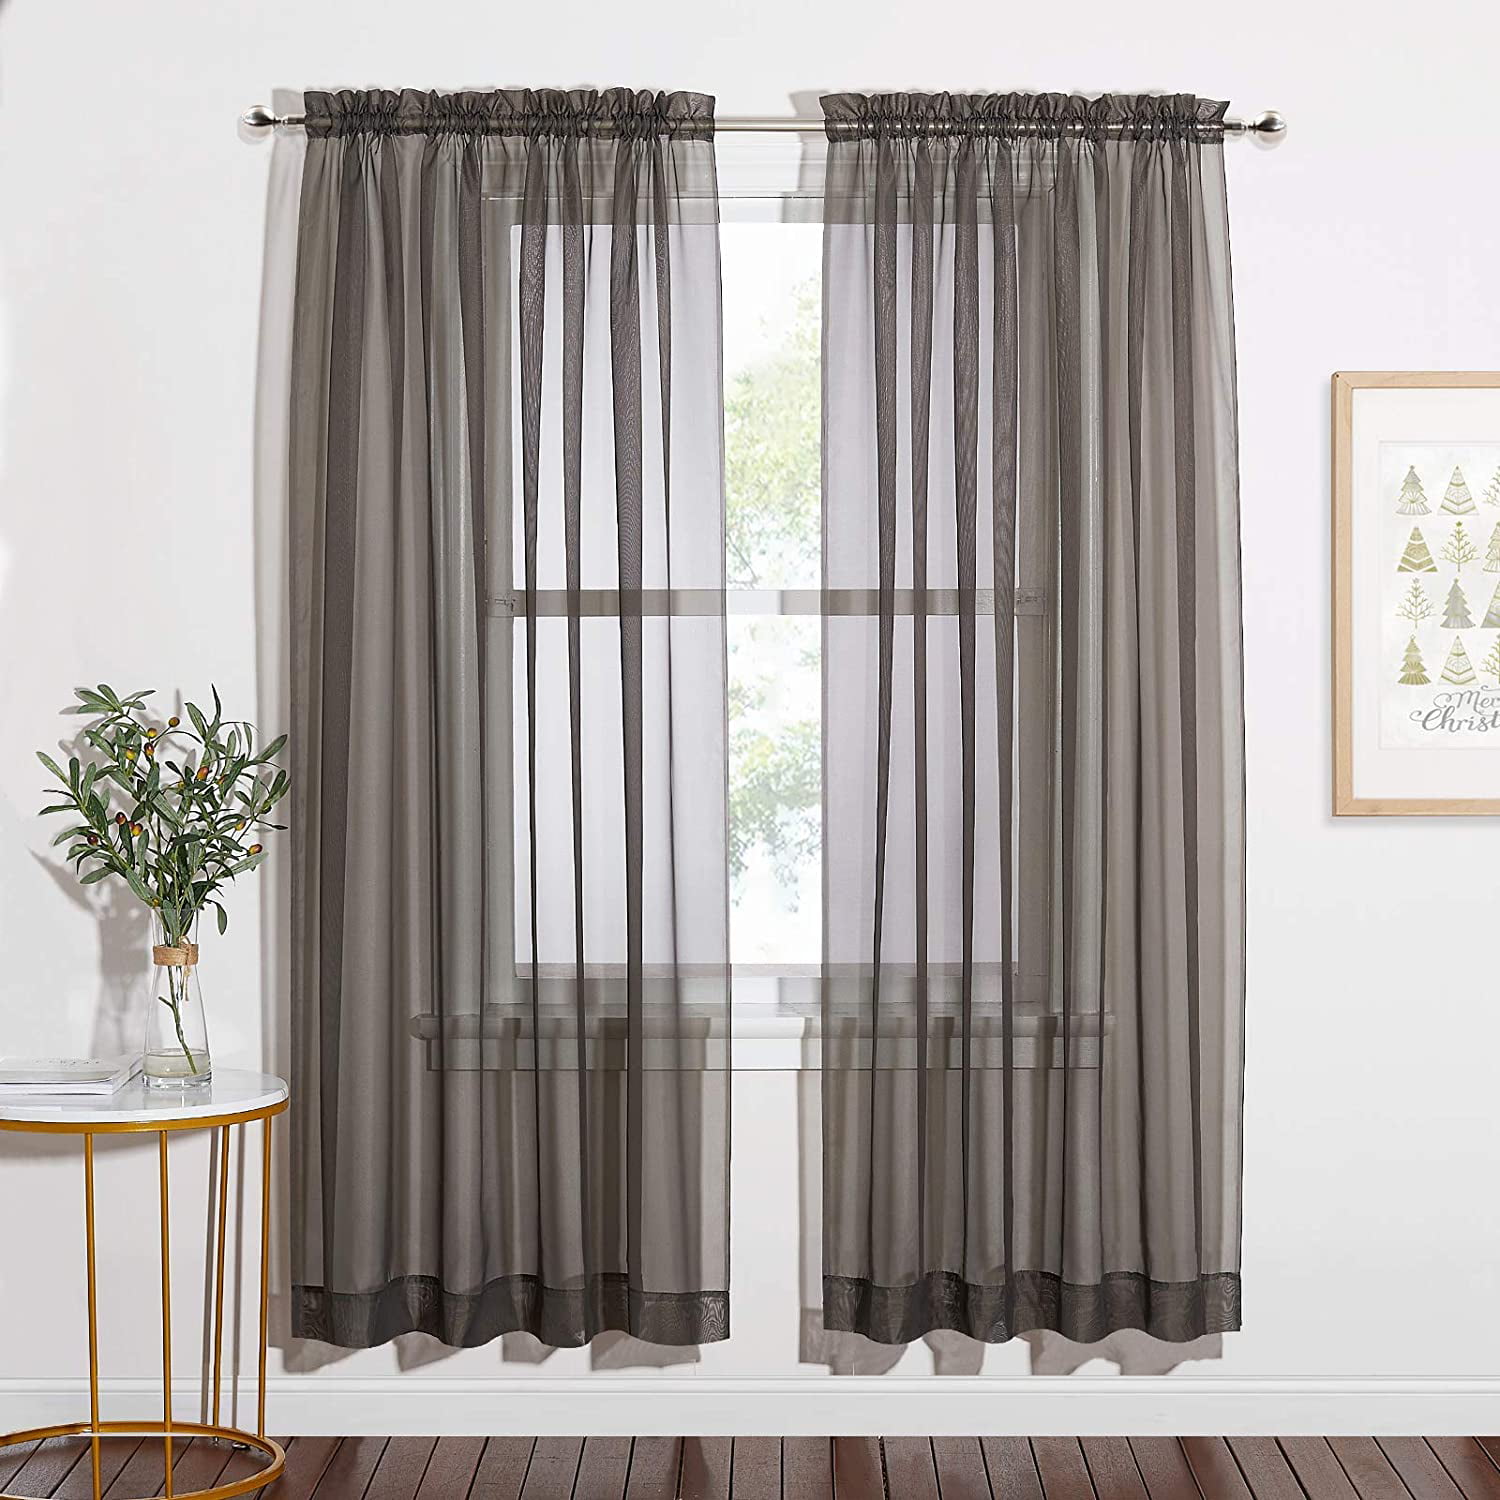 Sheer Elegance: The Beauty Of Translucent Curtains In Decor